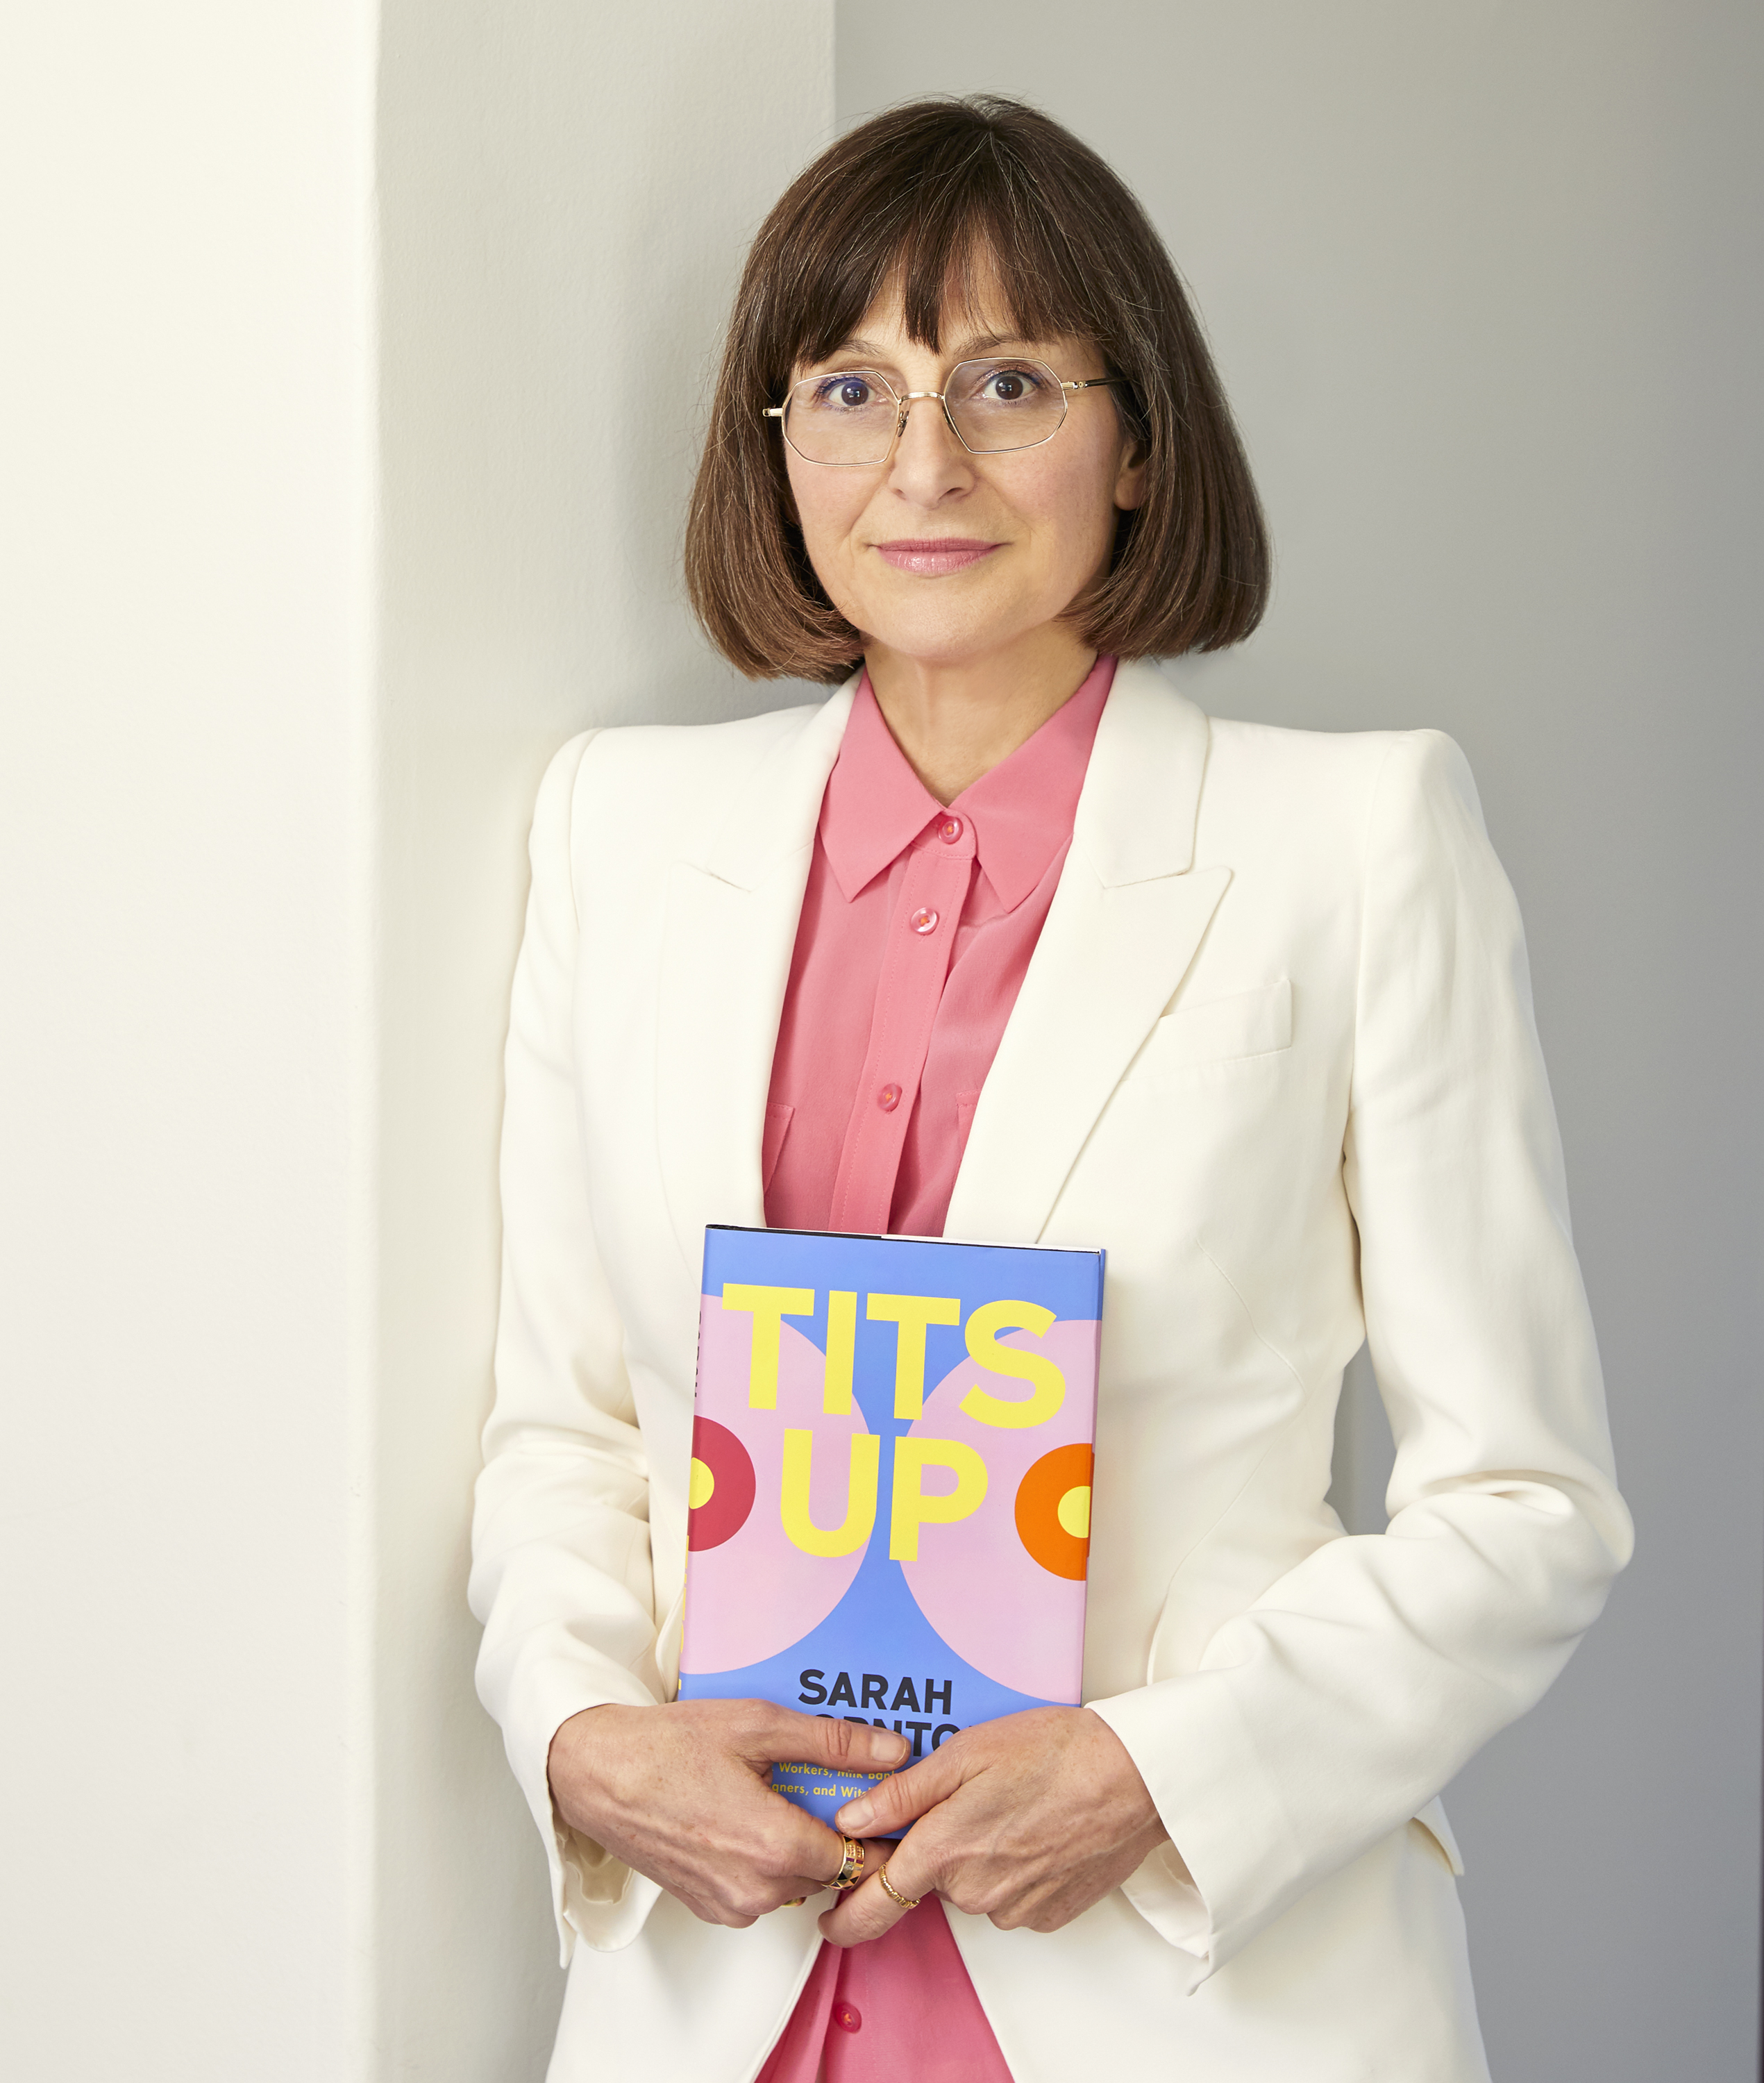 A woman in a white suit and pink shirt holding a book titled &quot;TITS UP&quot; against a plain background.